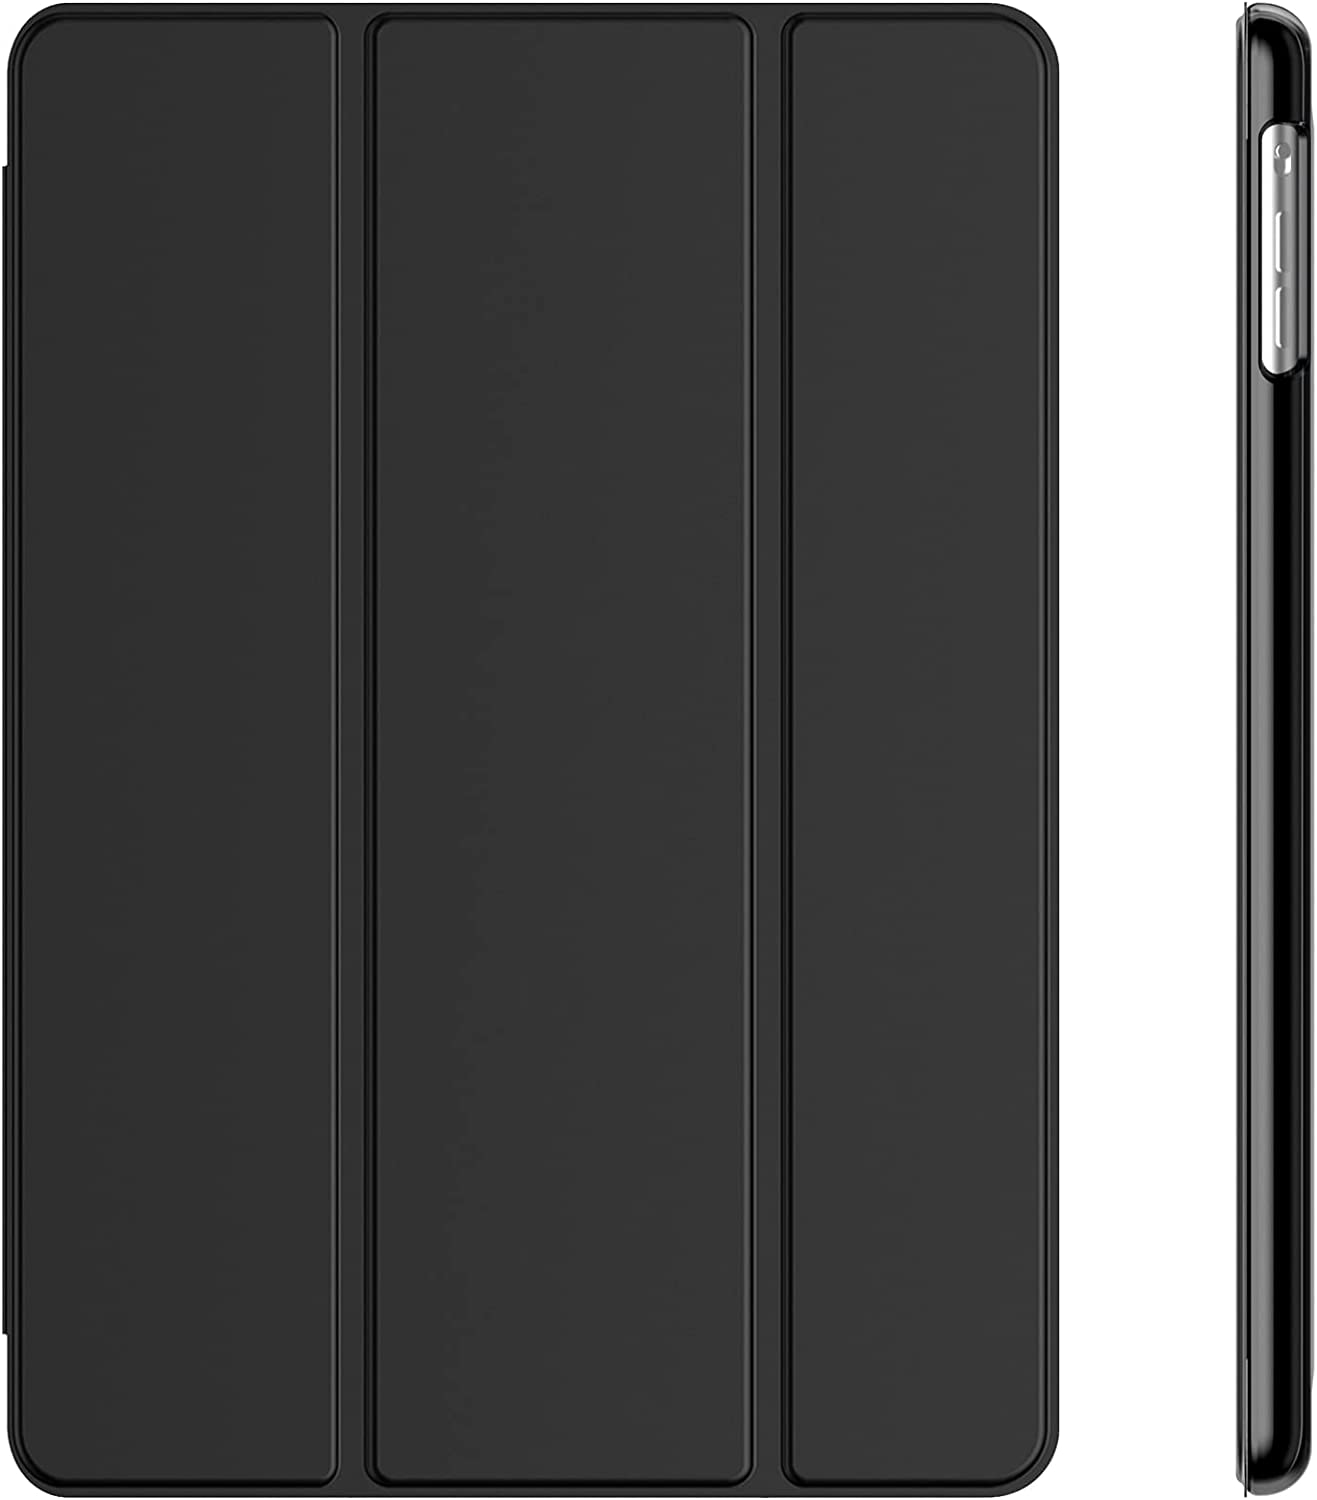 JETech Case for iPad Air 1st Generation (NOT for iPad Air 2), Smart Cover Auto Wake/Sleep Black